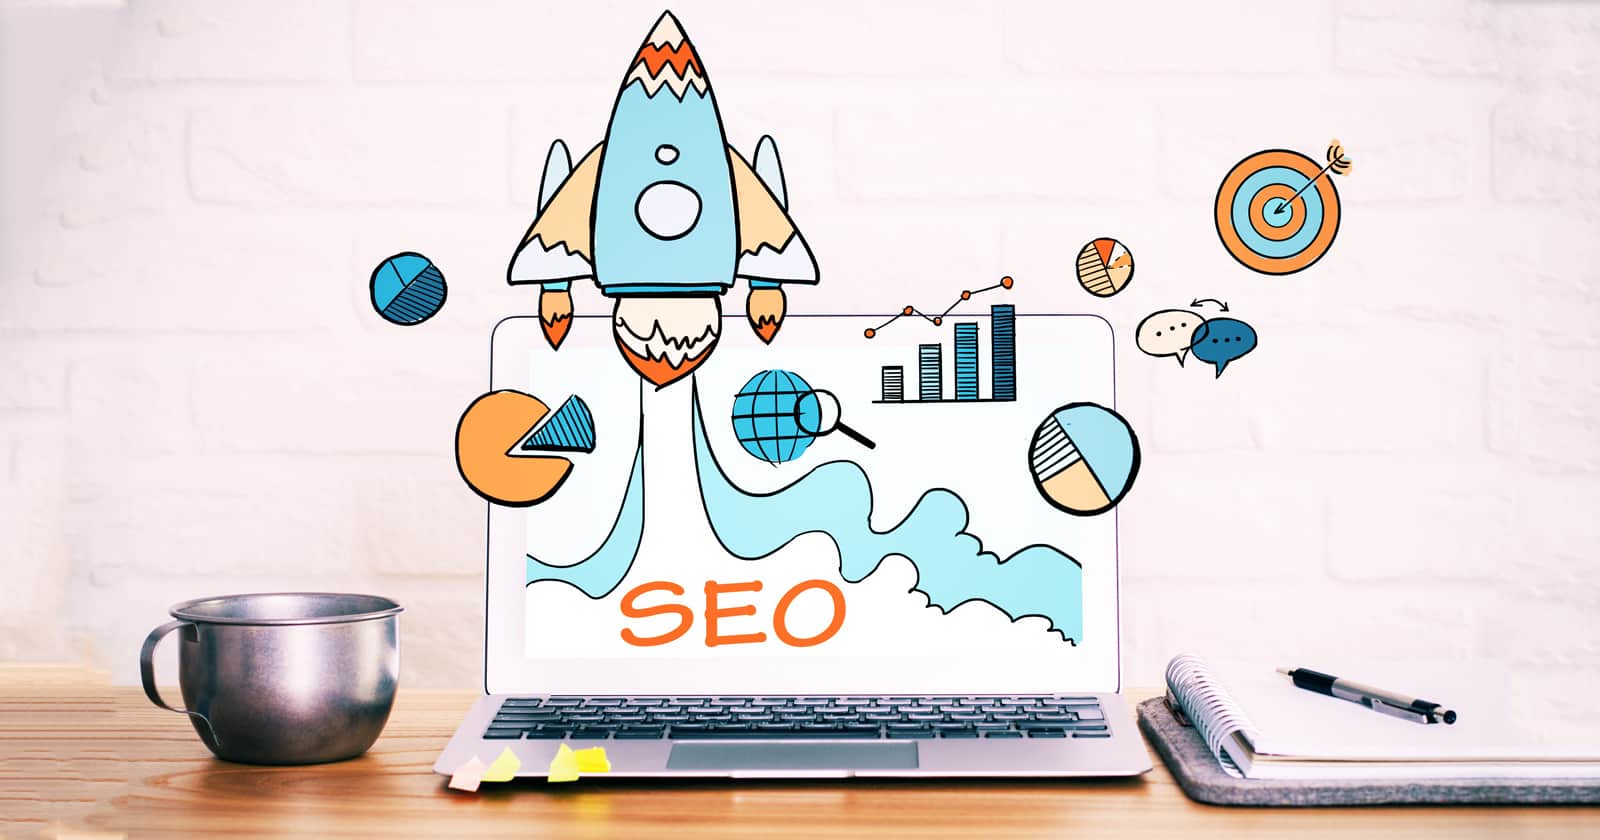 How to Grow Your Startup Business With SEO